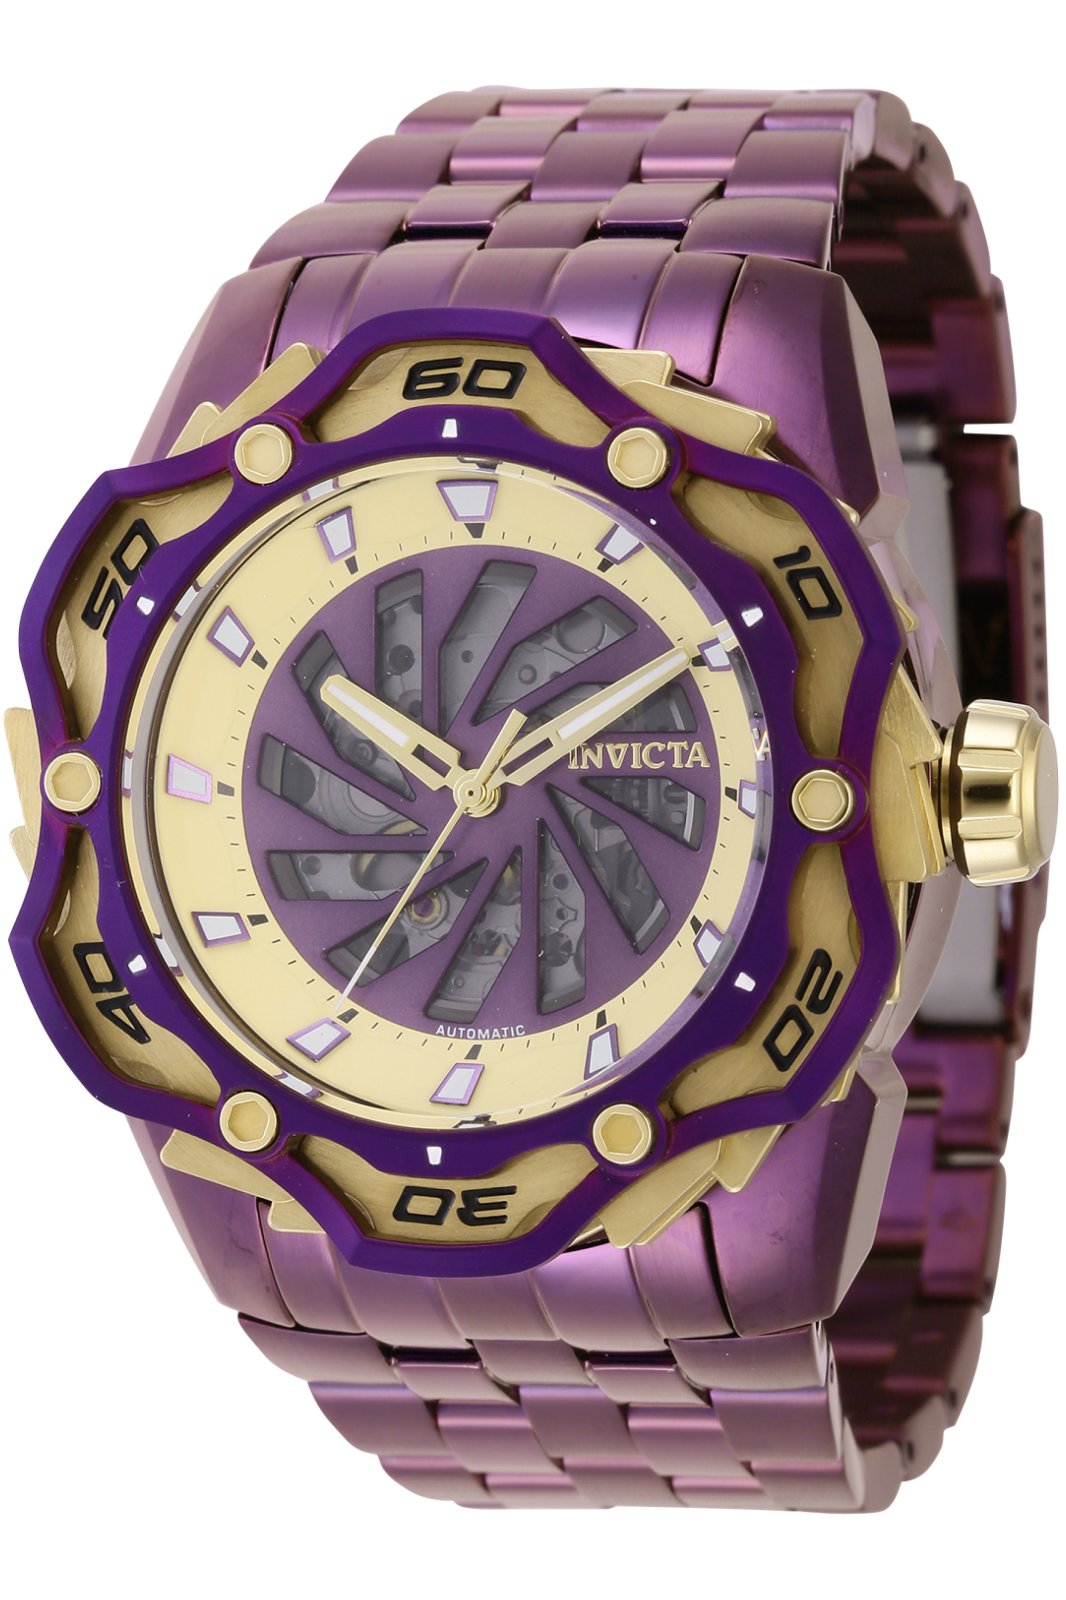 Invicta Ripsaw 44110 Men's Automatic Watch - 56mm